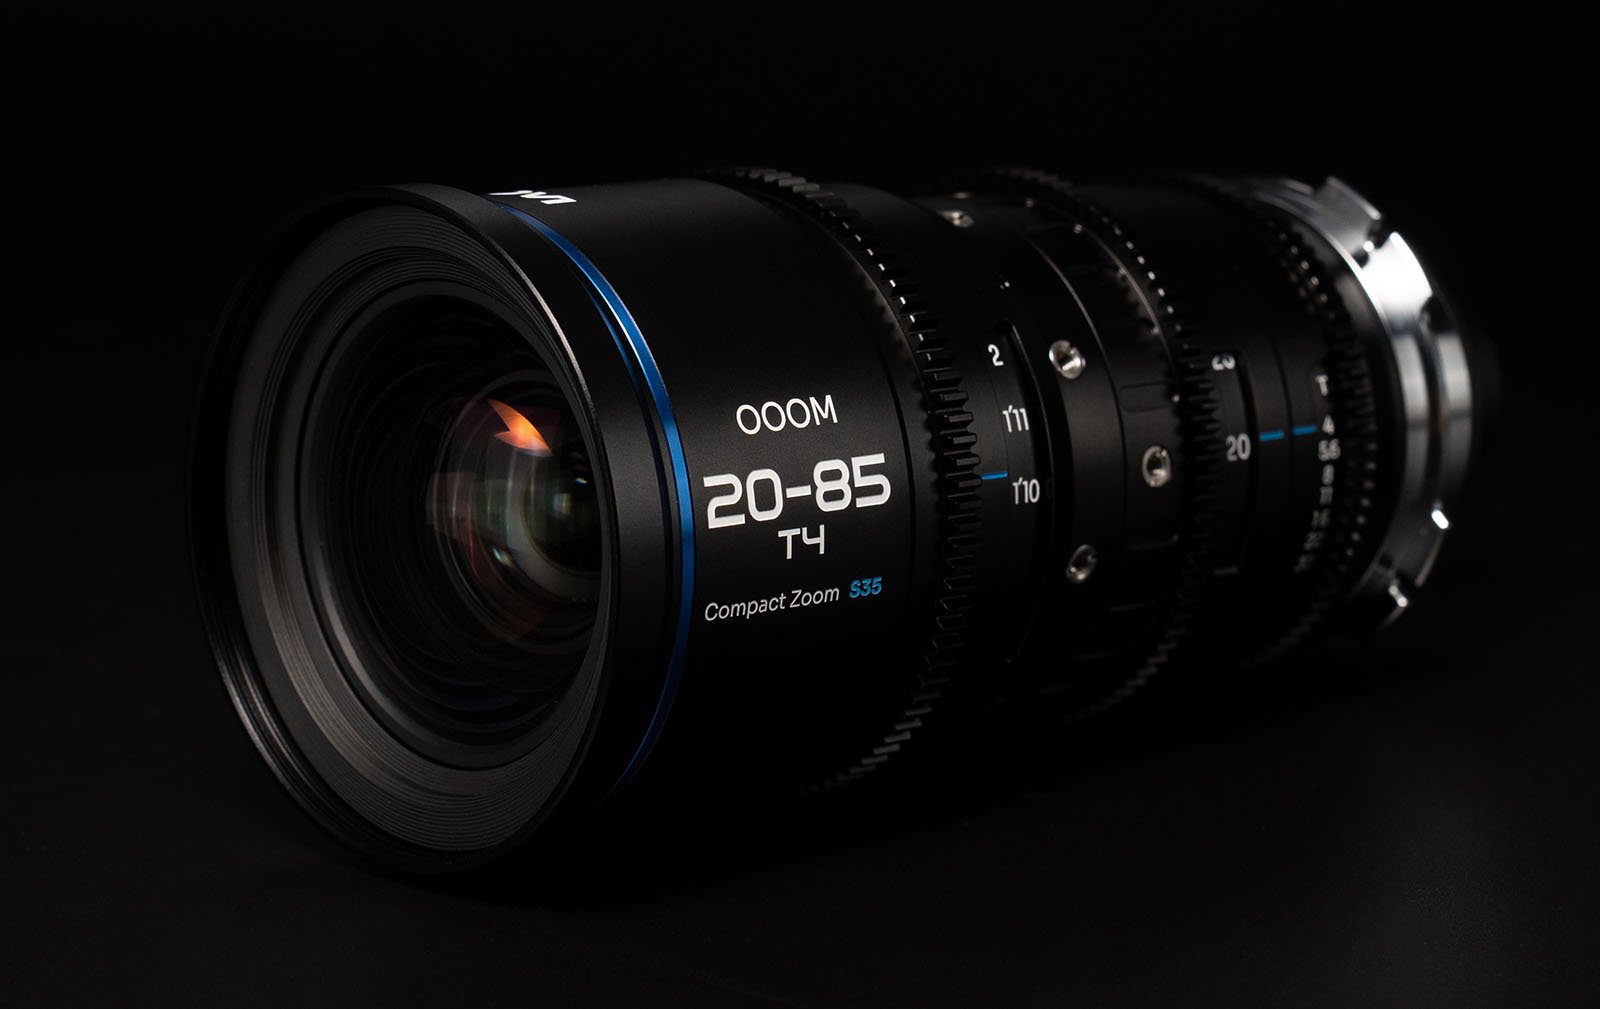 Close-up of a black camera lens labeled "20-85 T4" with various rings for adjusting focus, zoom, and aperture settings. The lens features a reflective front element and blue detailing. The background is black, emphasizing the sleek design of the lens.